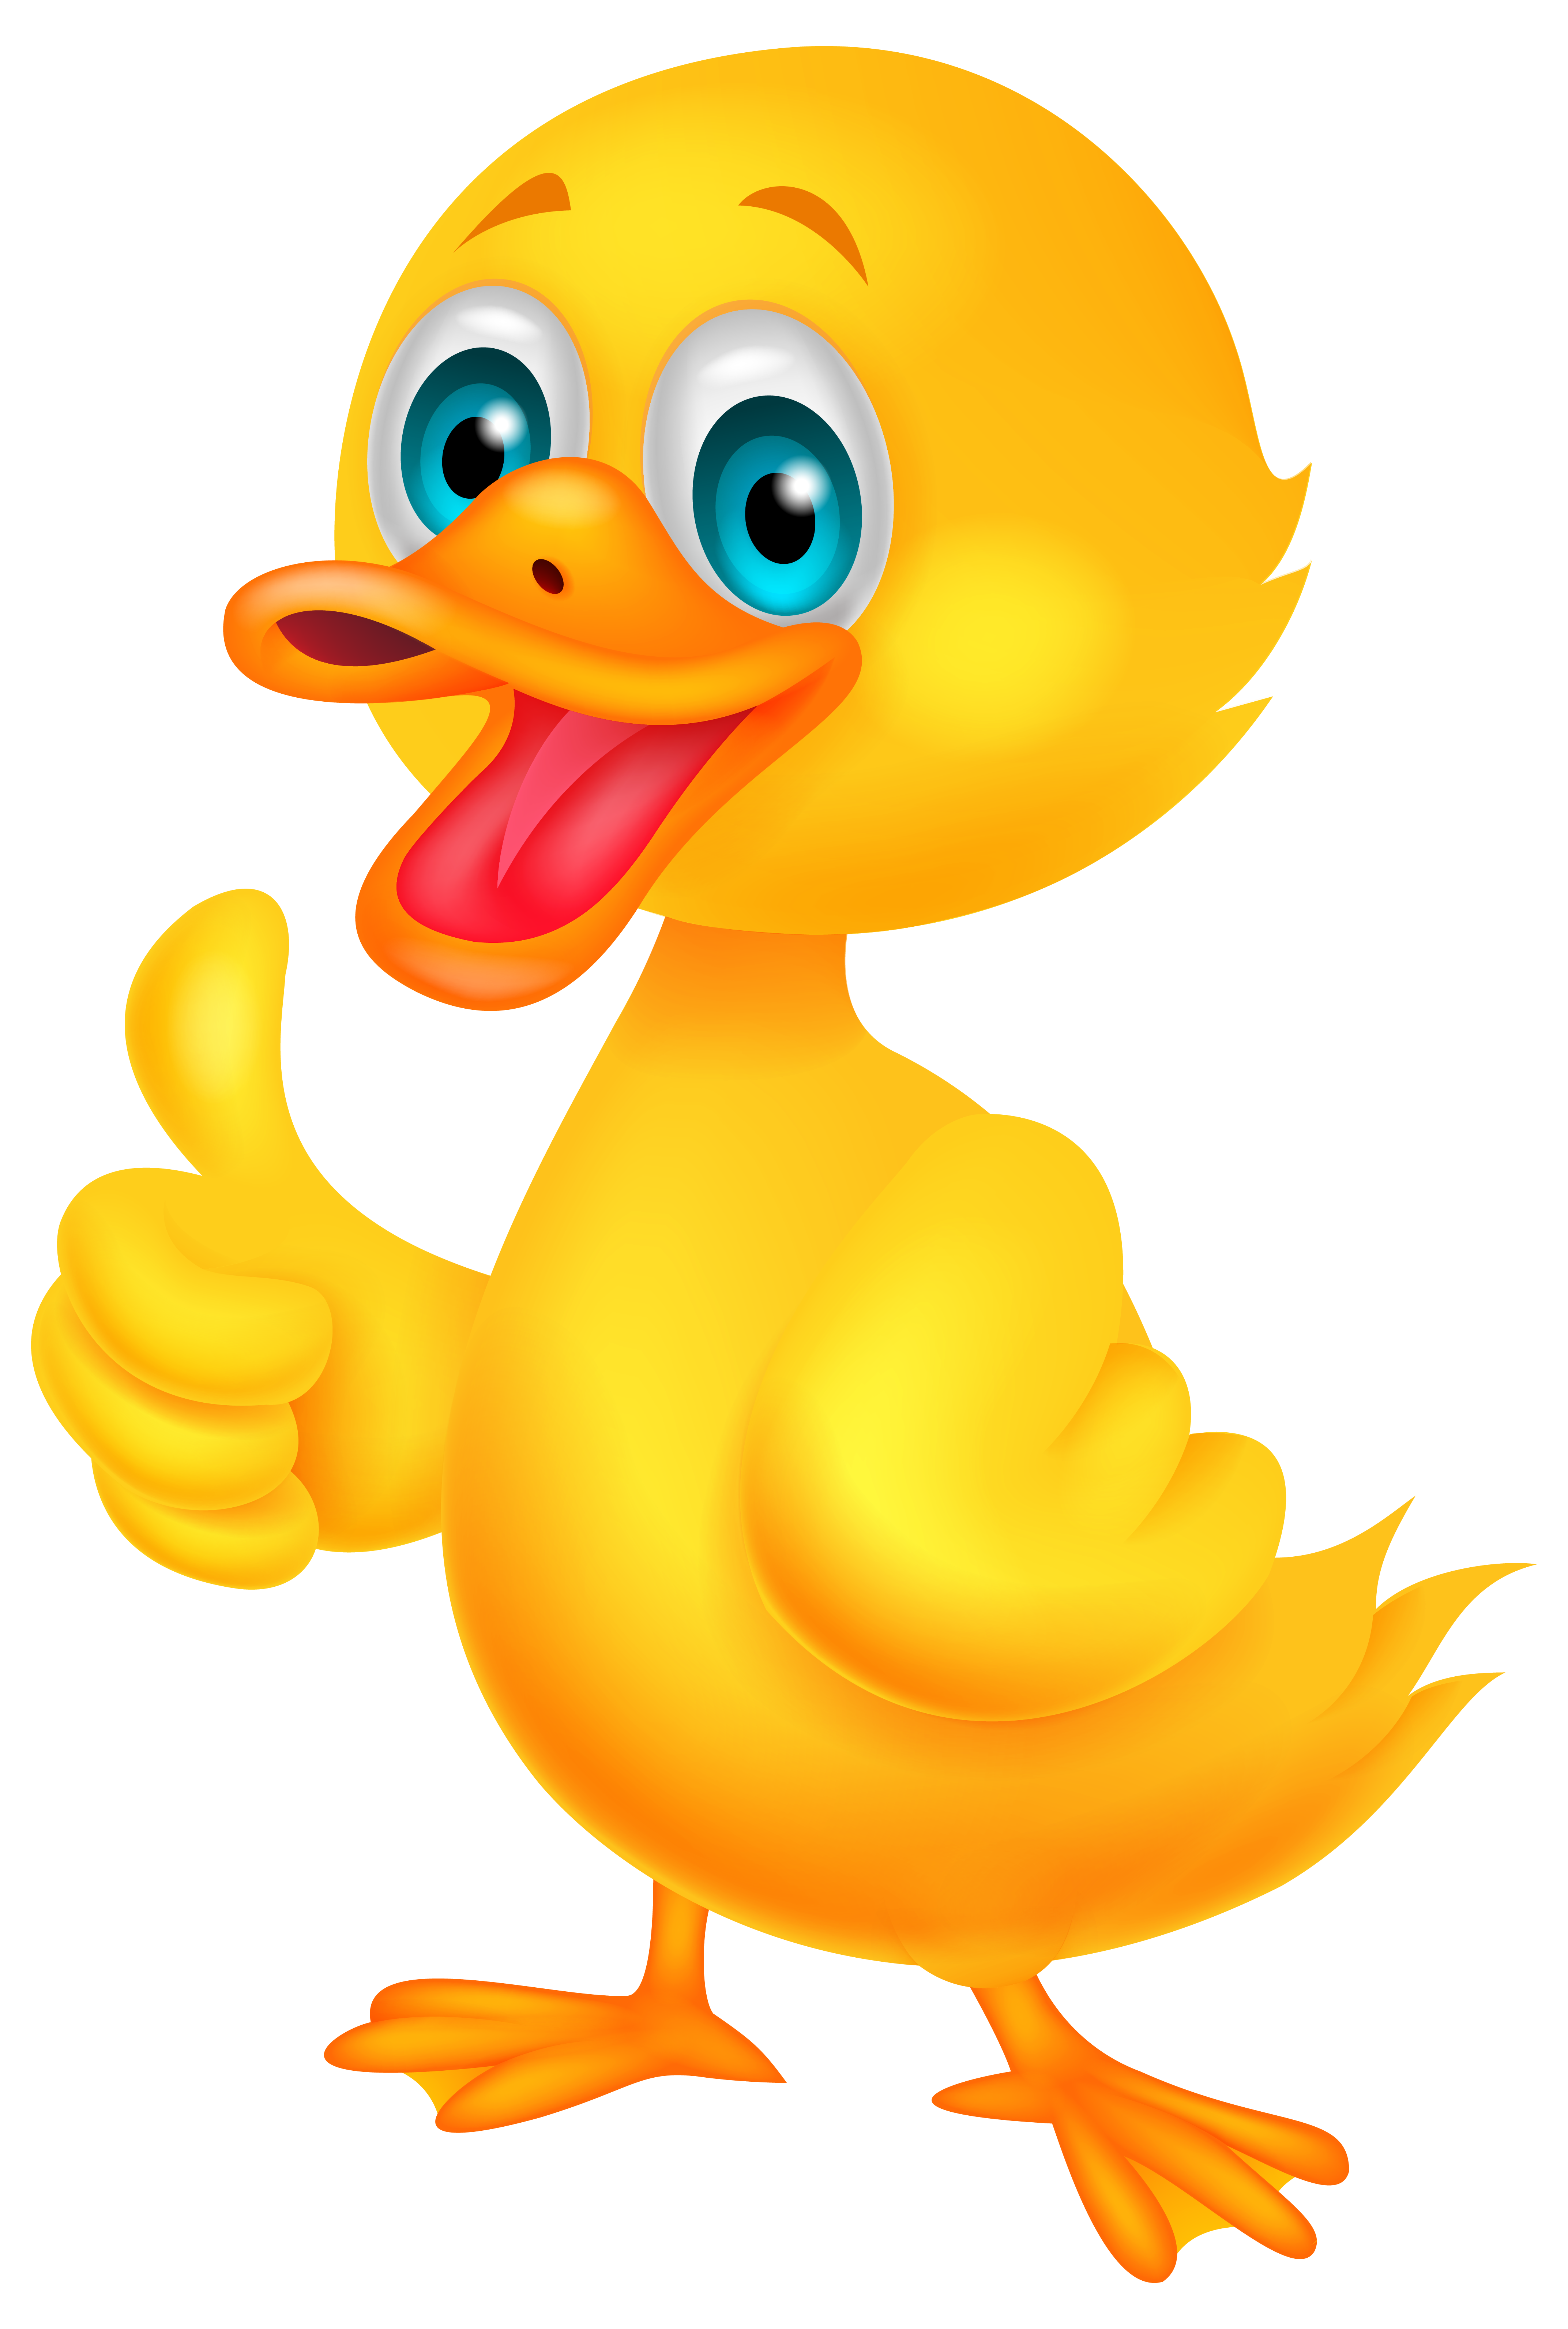 Donald duck png images. Duckling clipart goslings